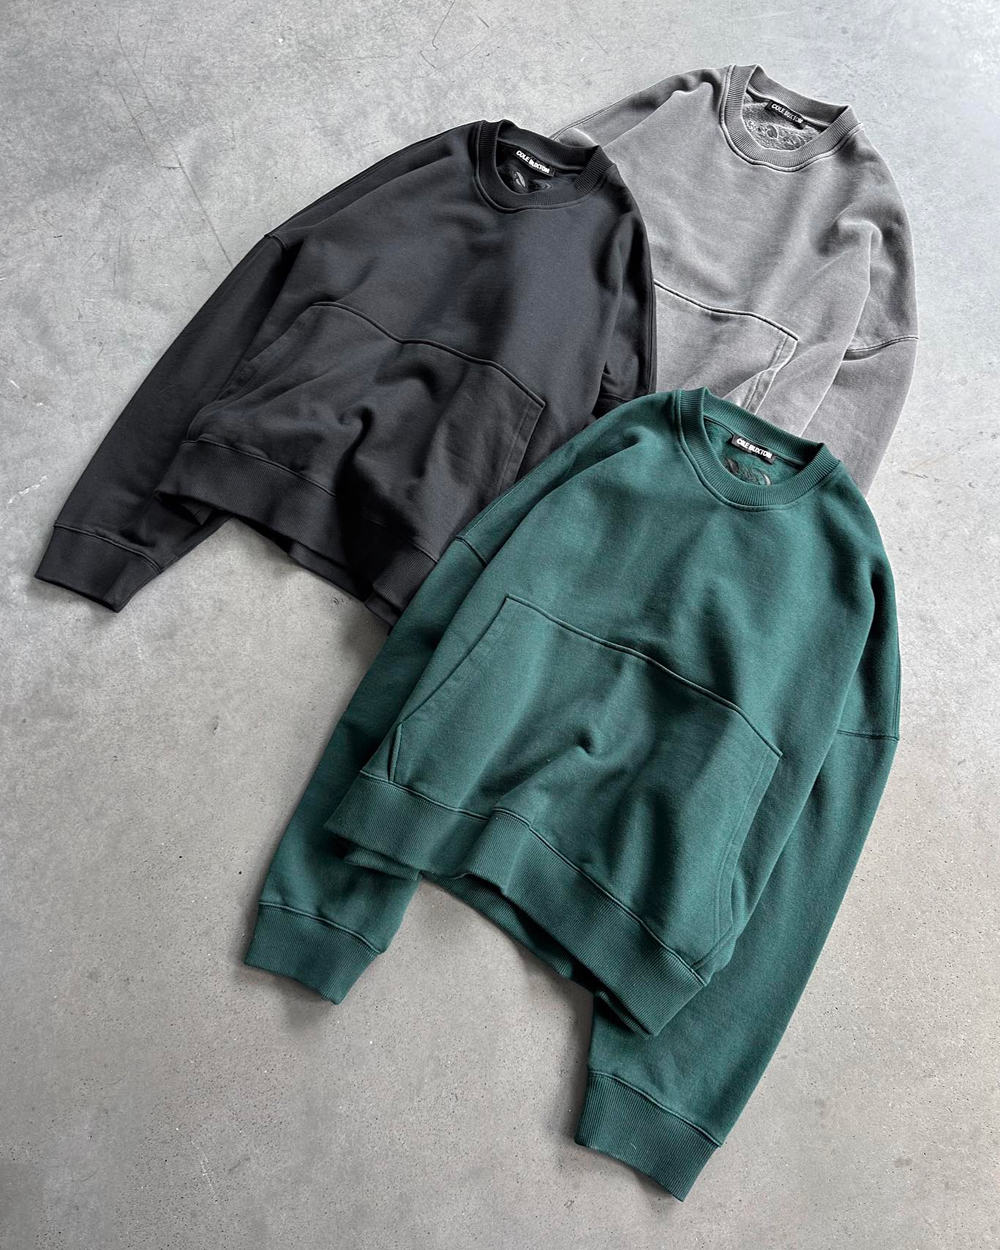 Three oversized sweatshirts by Cole Buxton in green, charcoal and grey laid out on concrete floor